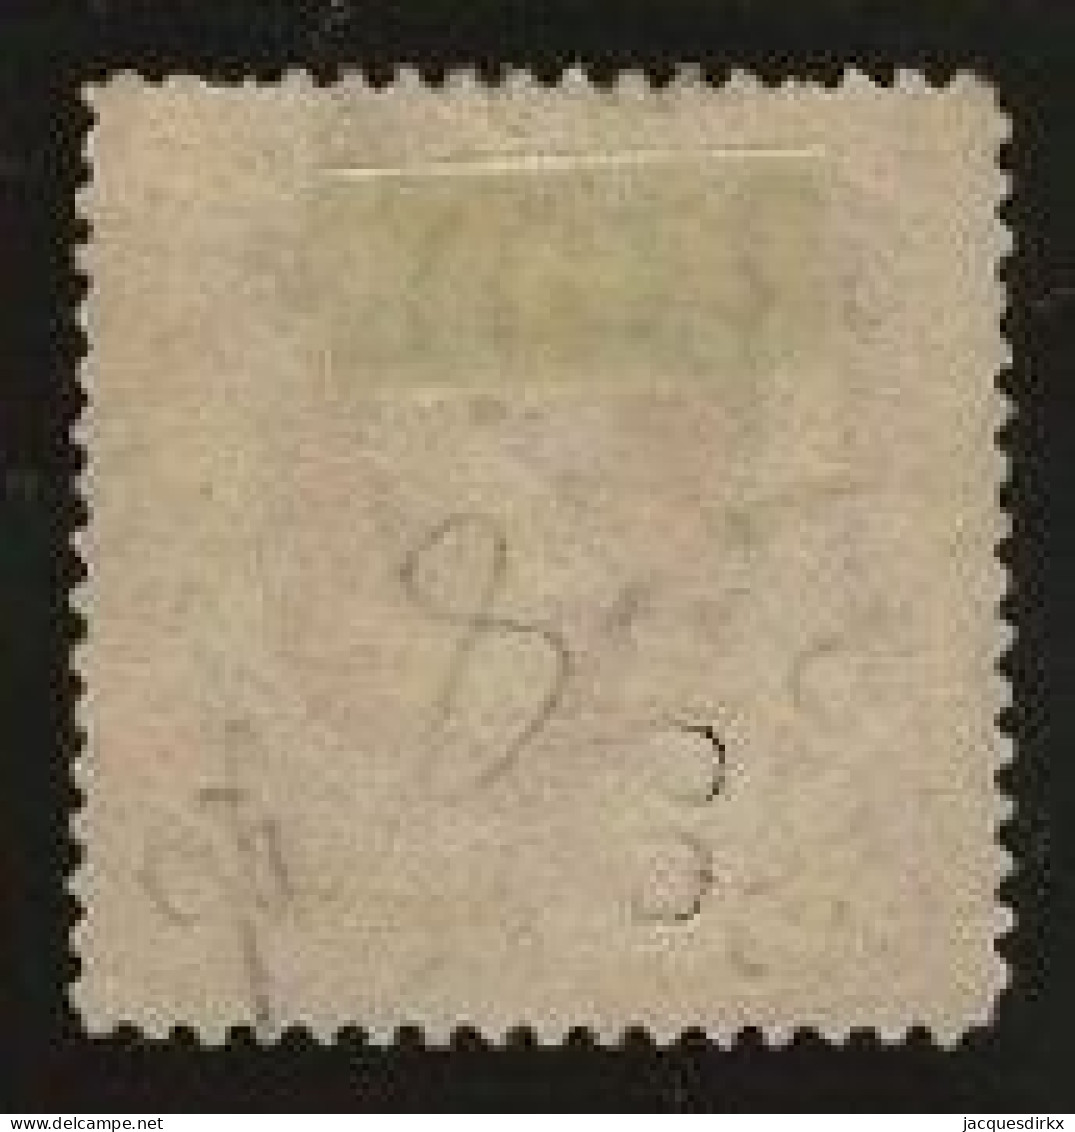 New South Wales      .   SG    .   153  (2 Scans)       .   O      .     Cancelled - Used Stamps